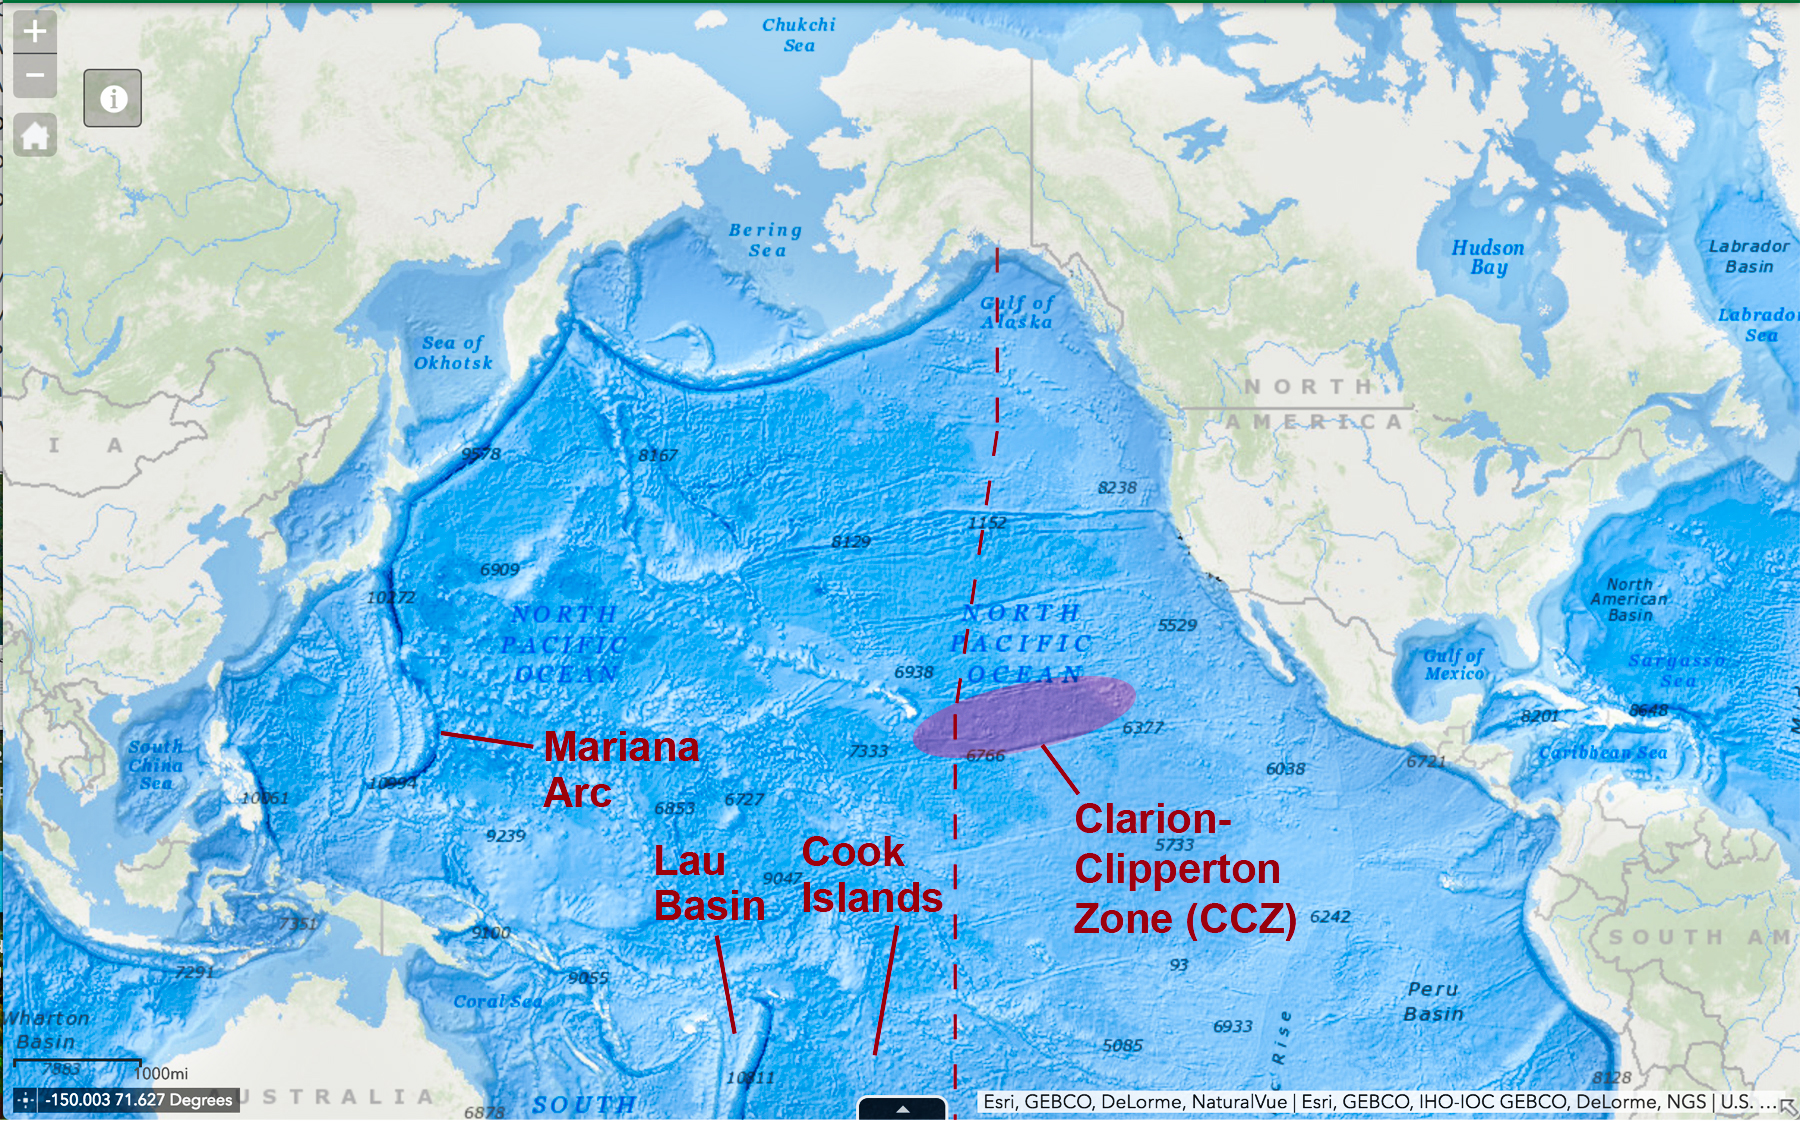 A map of the Pacific Ocean showing the location of the Clarion-Clipperton Zone, an area deep sea mining companies are interested as a source of polymetallic nodules